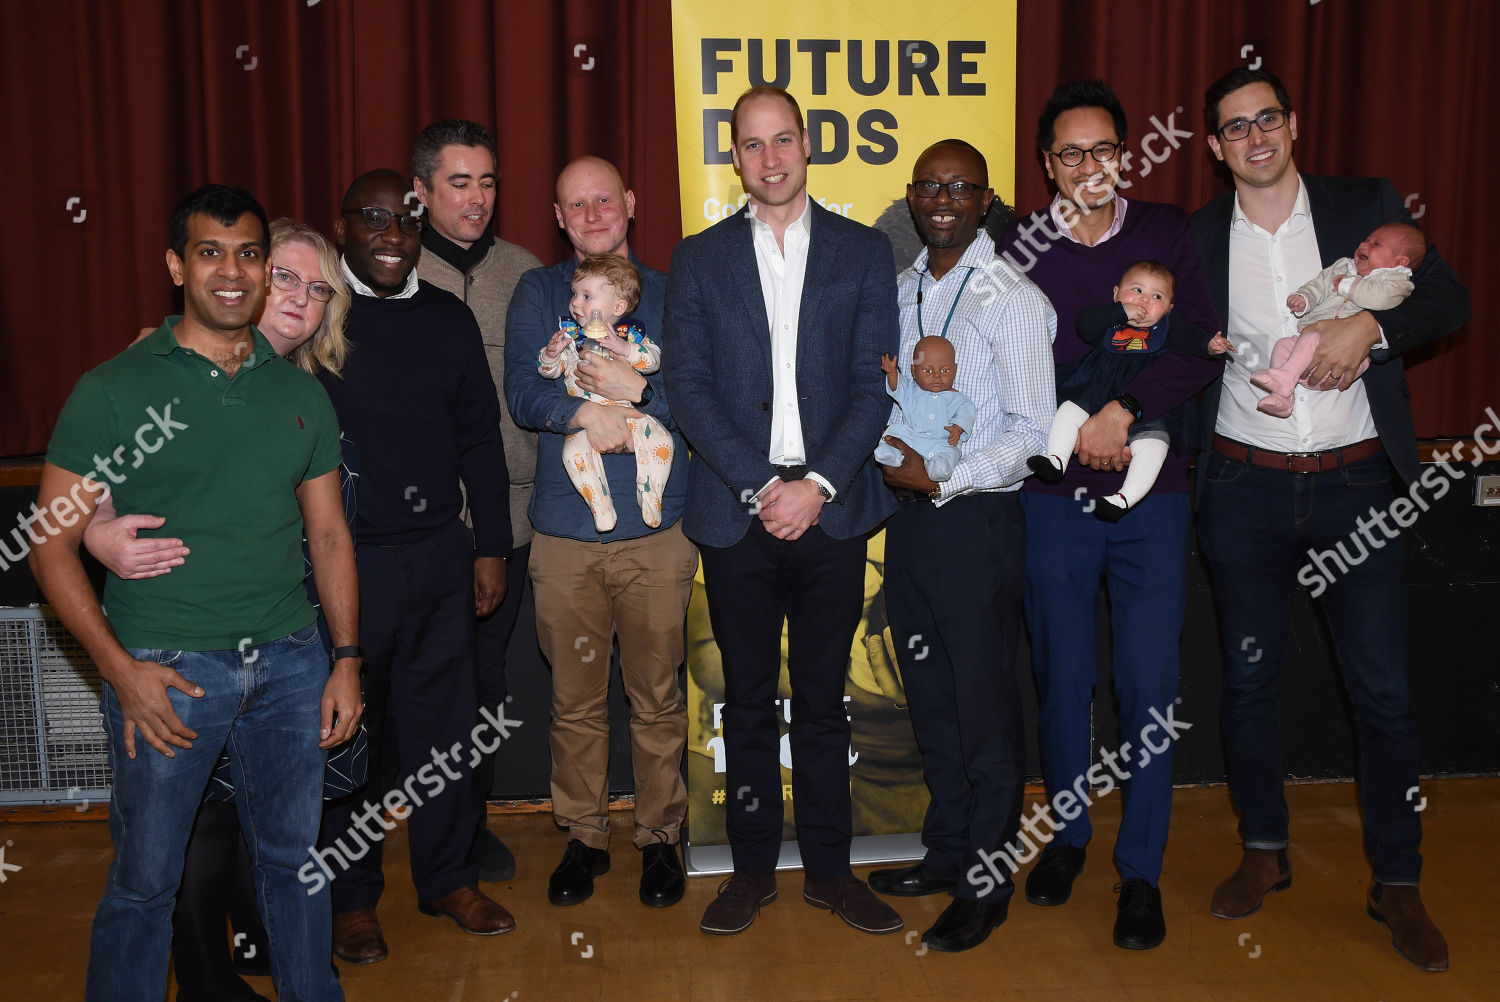 prince-william-visit-to-the-future-men-fathers-development-programme-abbey-centre-london-uk-shutterstock-editorial-10105817y.jpg